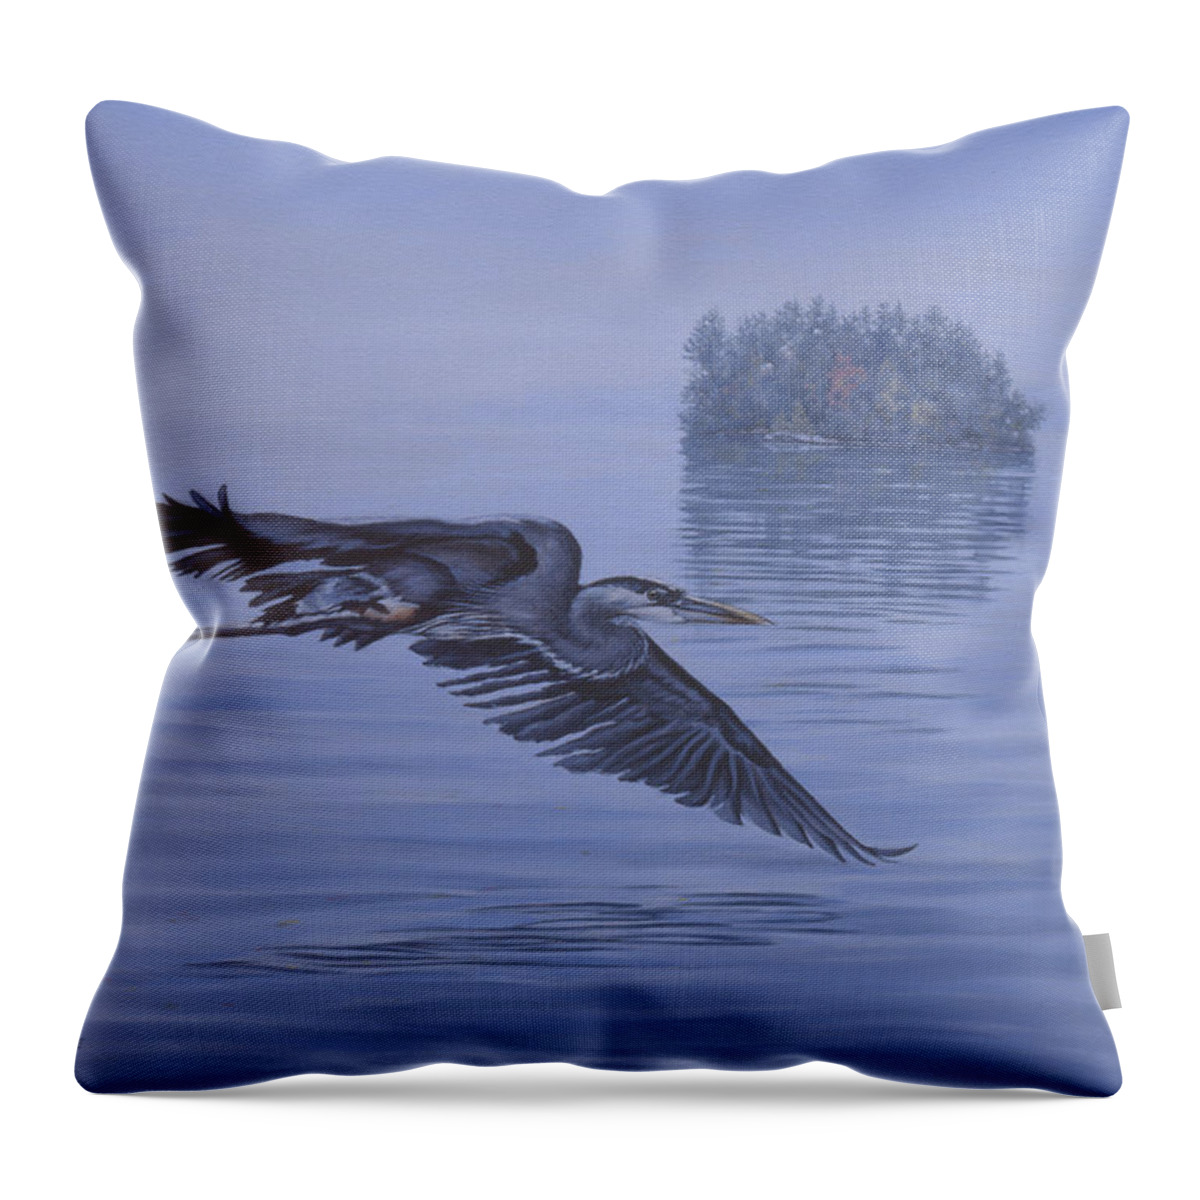 Great Throw Pillow featuring the painting The Fisherman by Richard De Wolfe